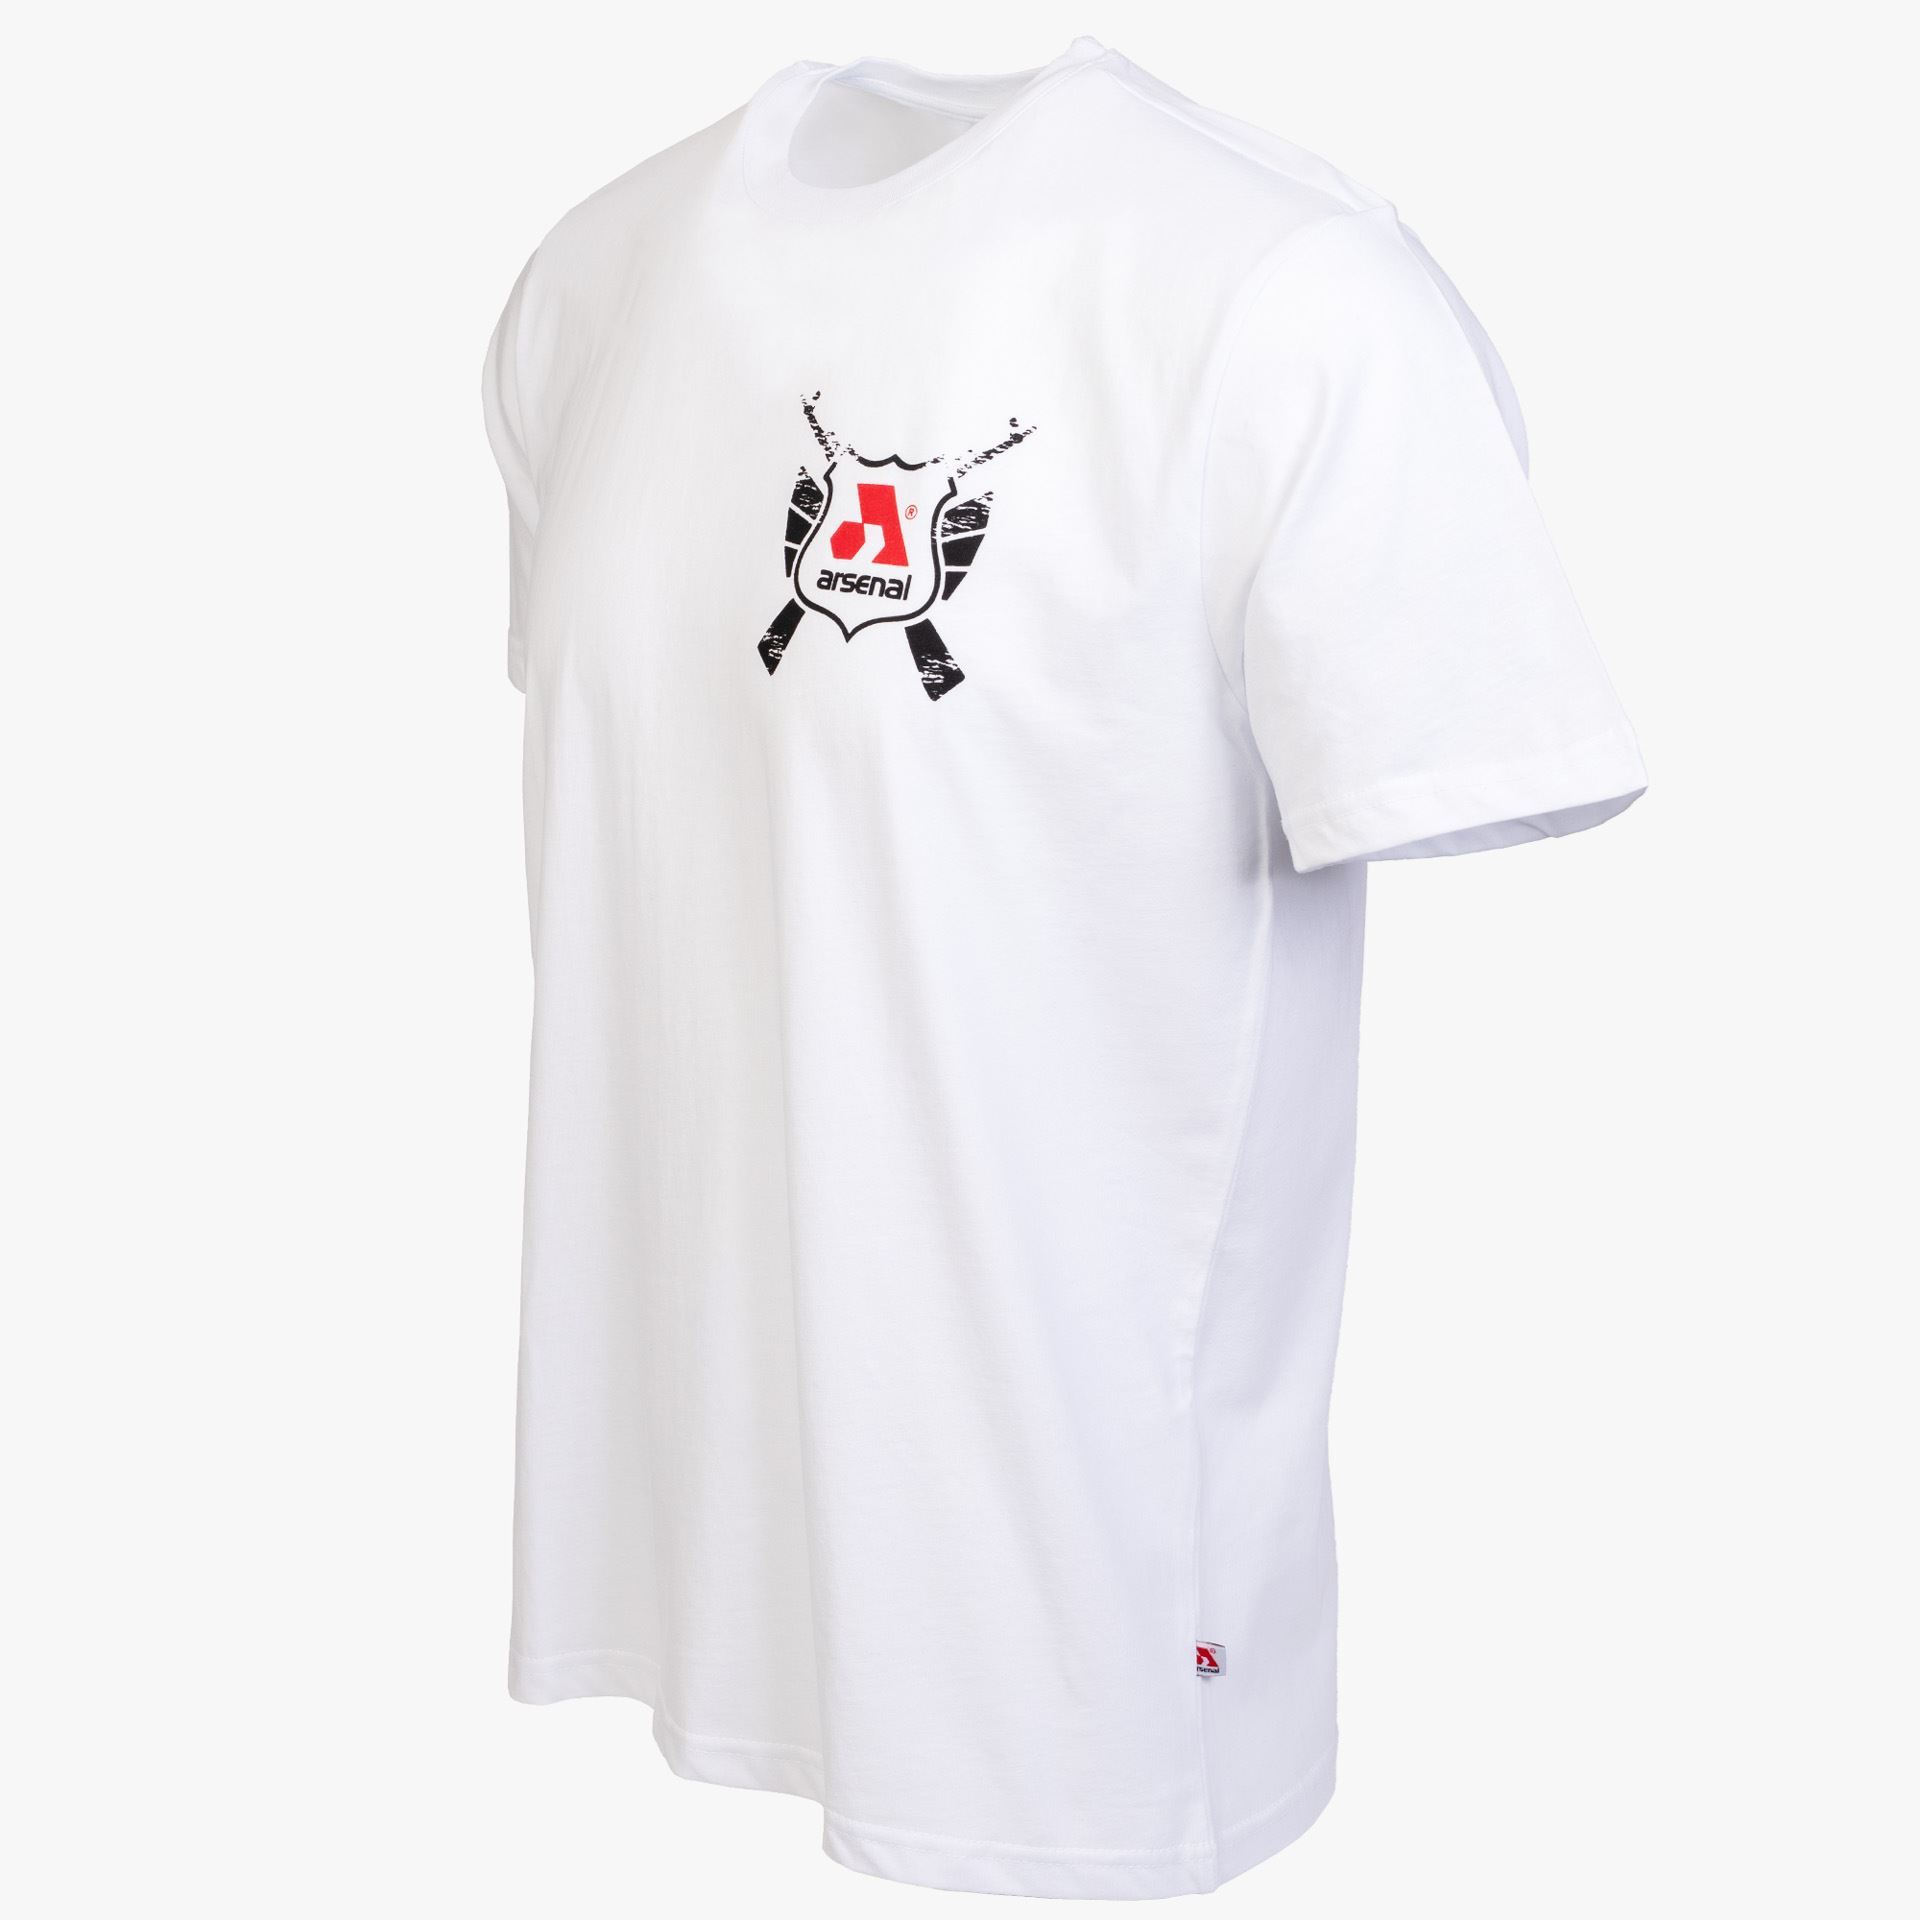 Arsenal White Cotton Relaxed Fit Classic T-Shirt at K-Var